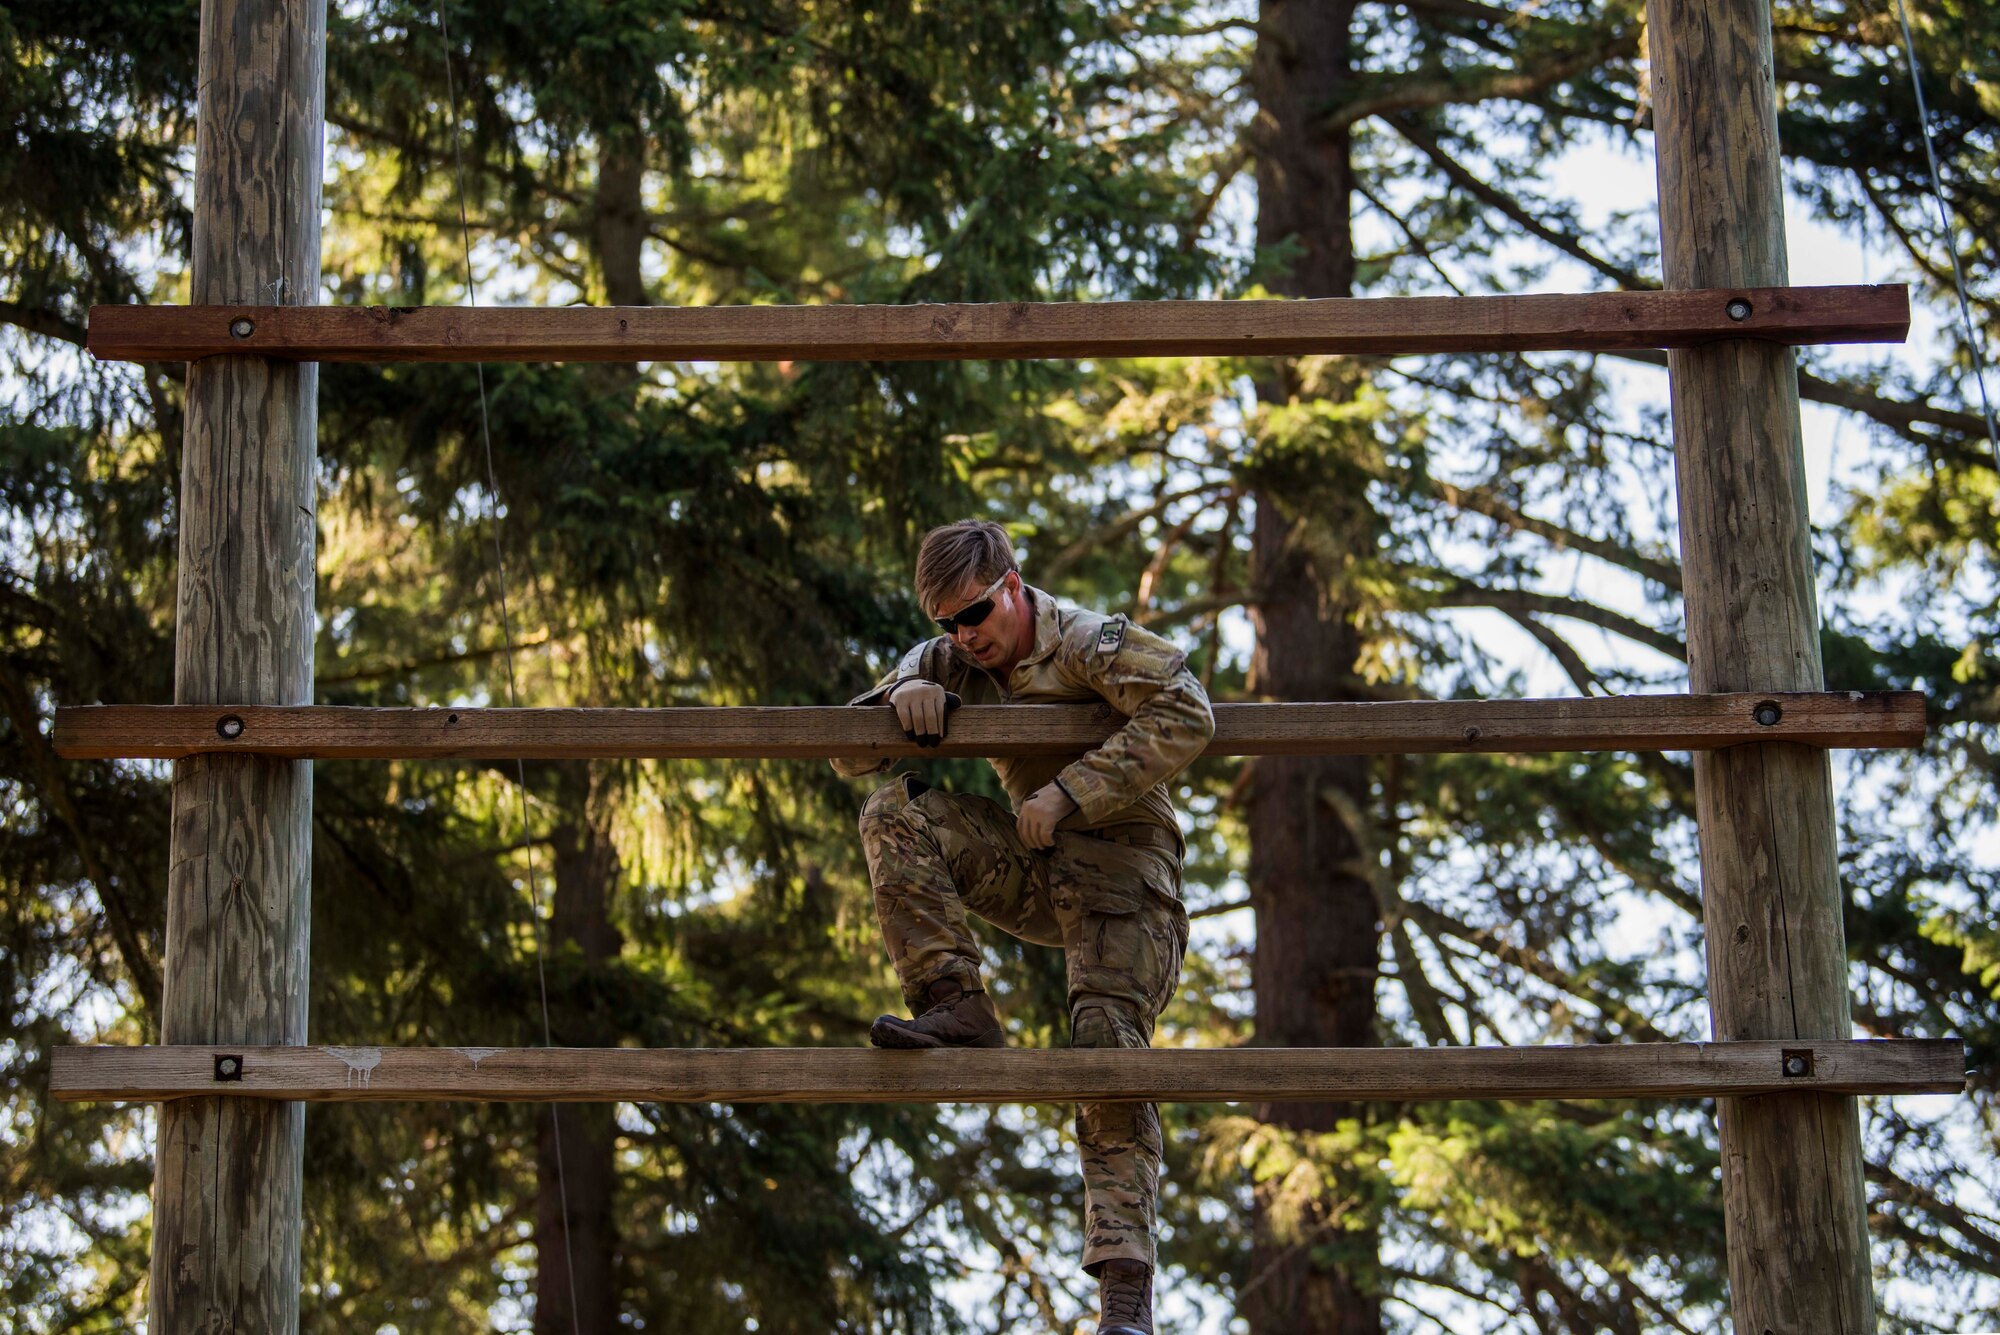 A U.S. Air Force Tactical Air Control Party (TACP) Airman assigned to the 3rd Air Support Operations Squadron, Fort Wainwright, Alaska, descends an obstacle during the 2019 Lightning Challenge at Joint Base Lewis-McChord, Wash., July 29, 2019.